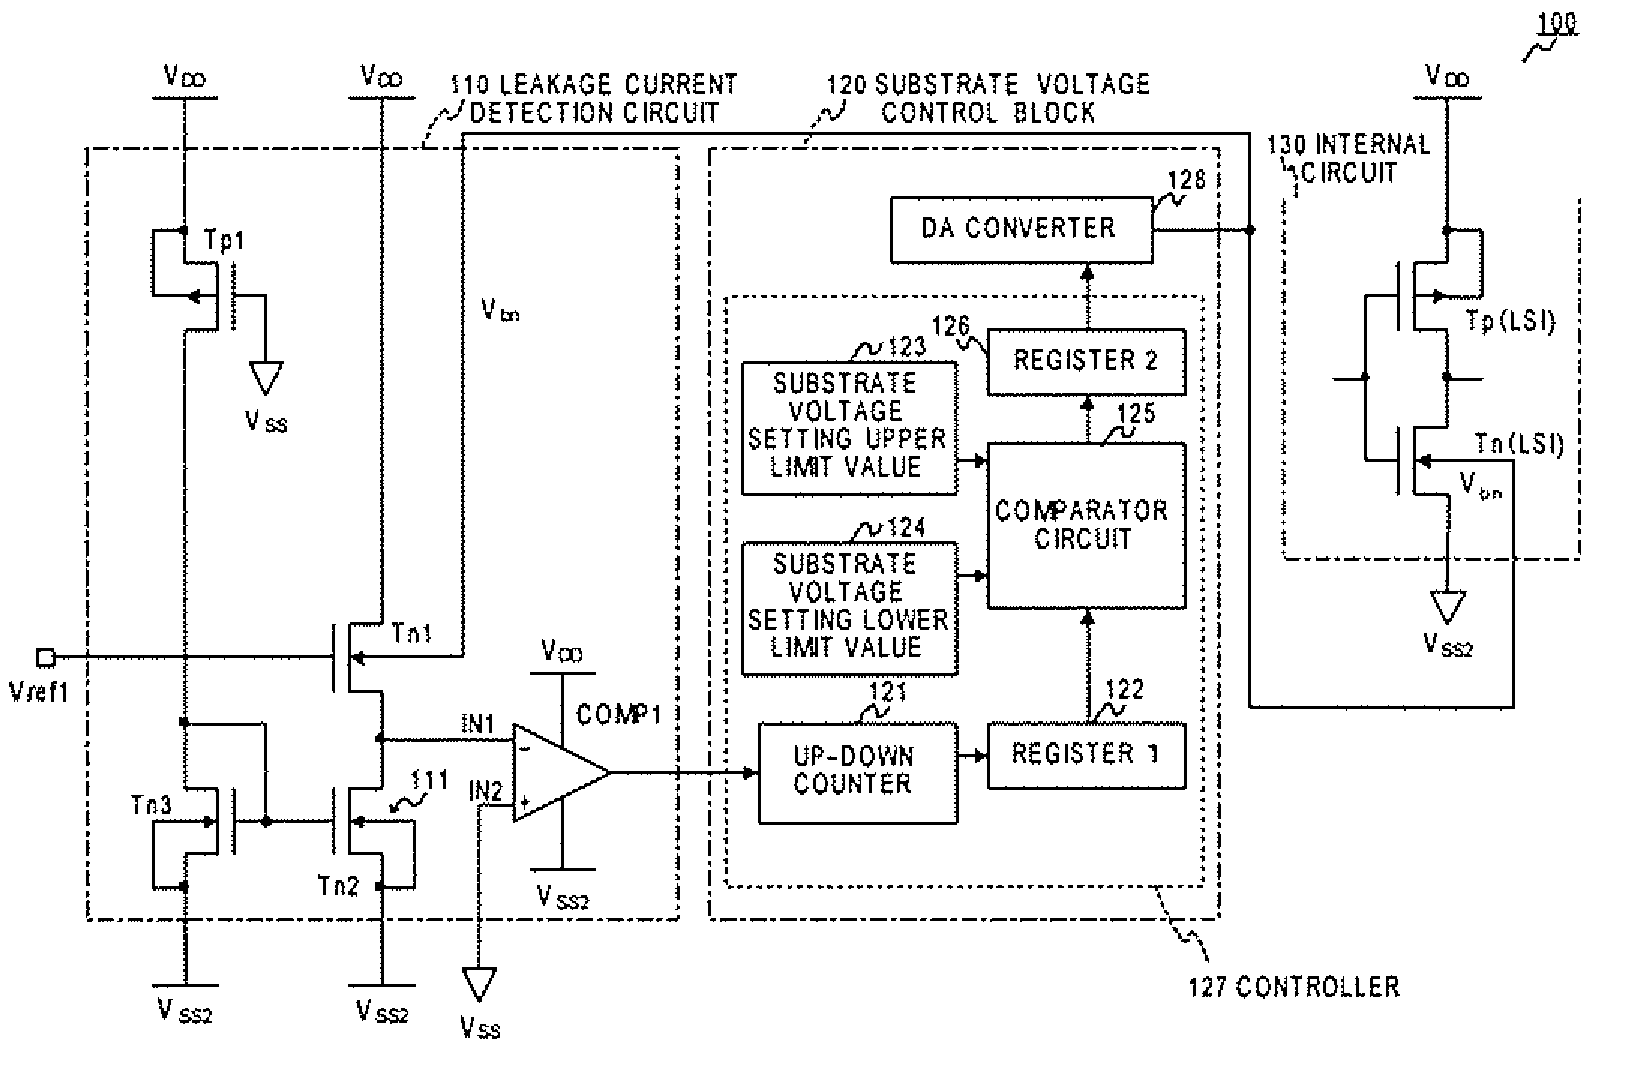 Apparatus for controlling substrate voltage of semiconductor device